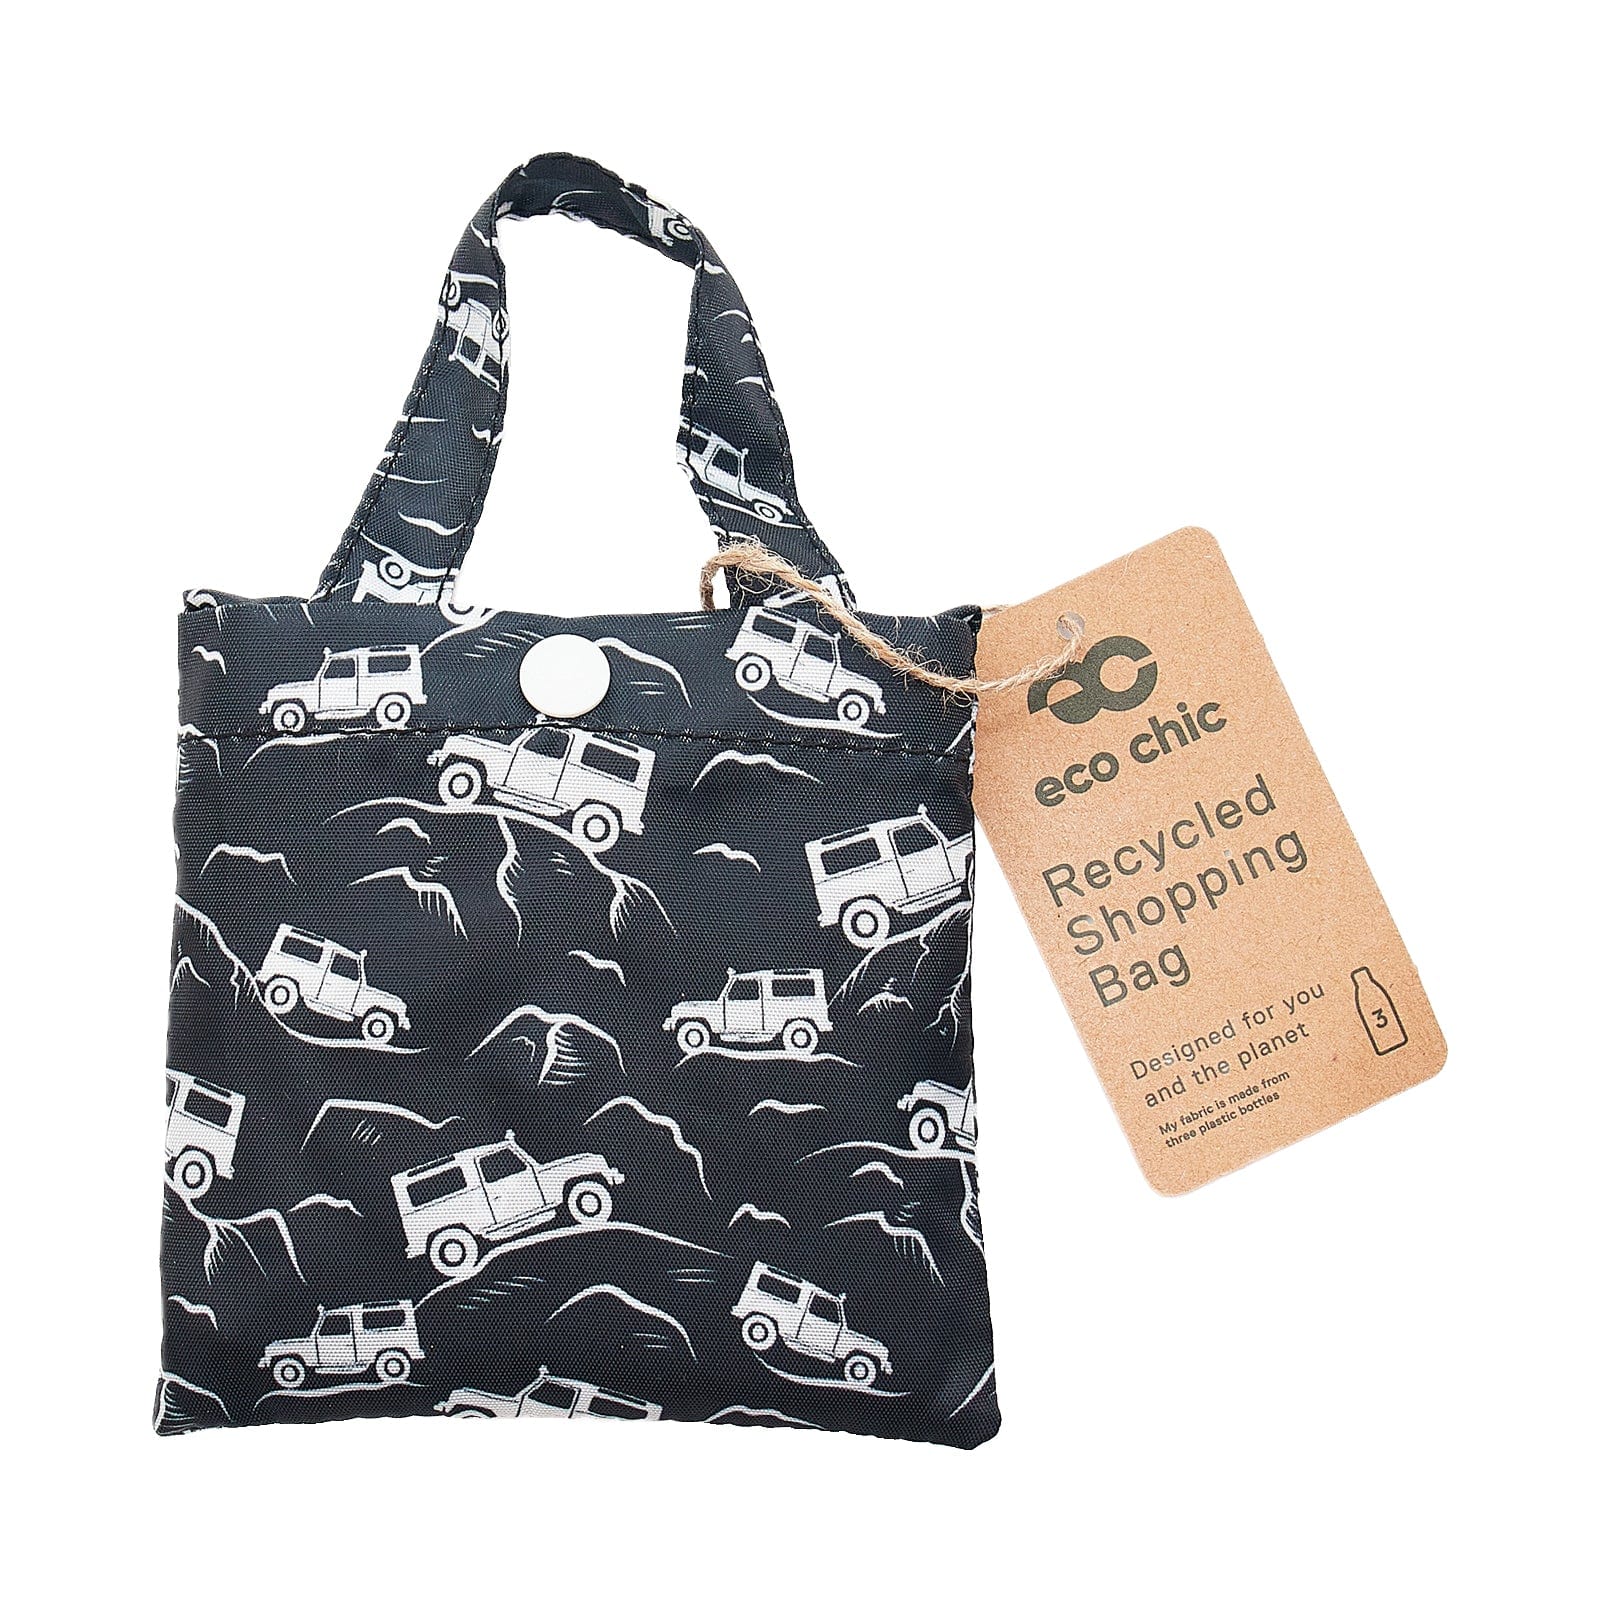 Eco Chic Eco Chic Lightweight Foldable Reusable Shopping Bag Landrovers